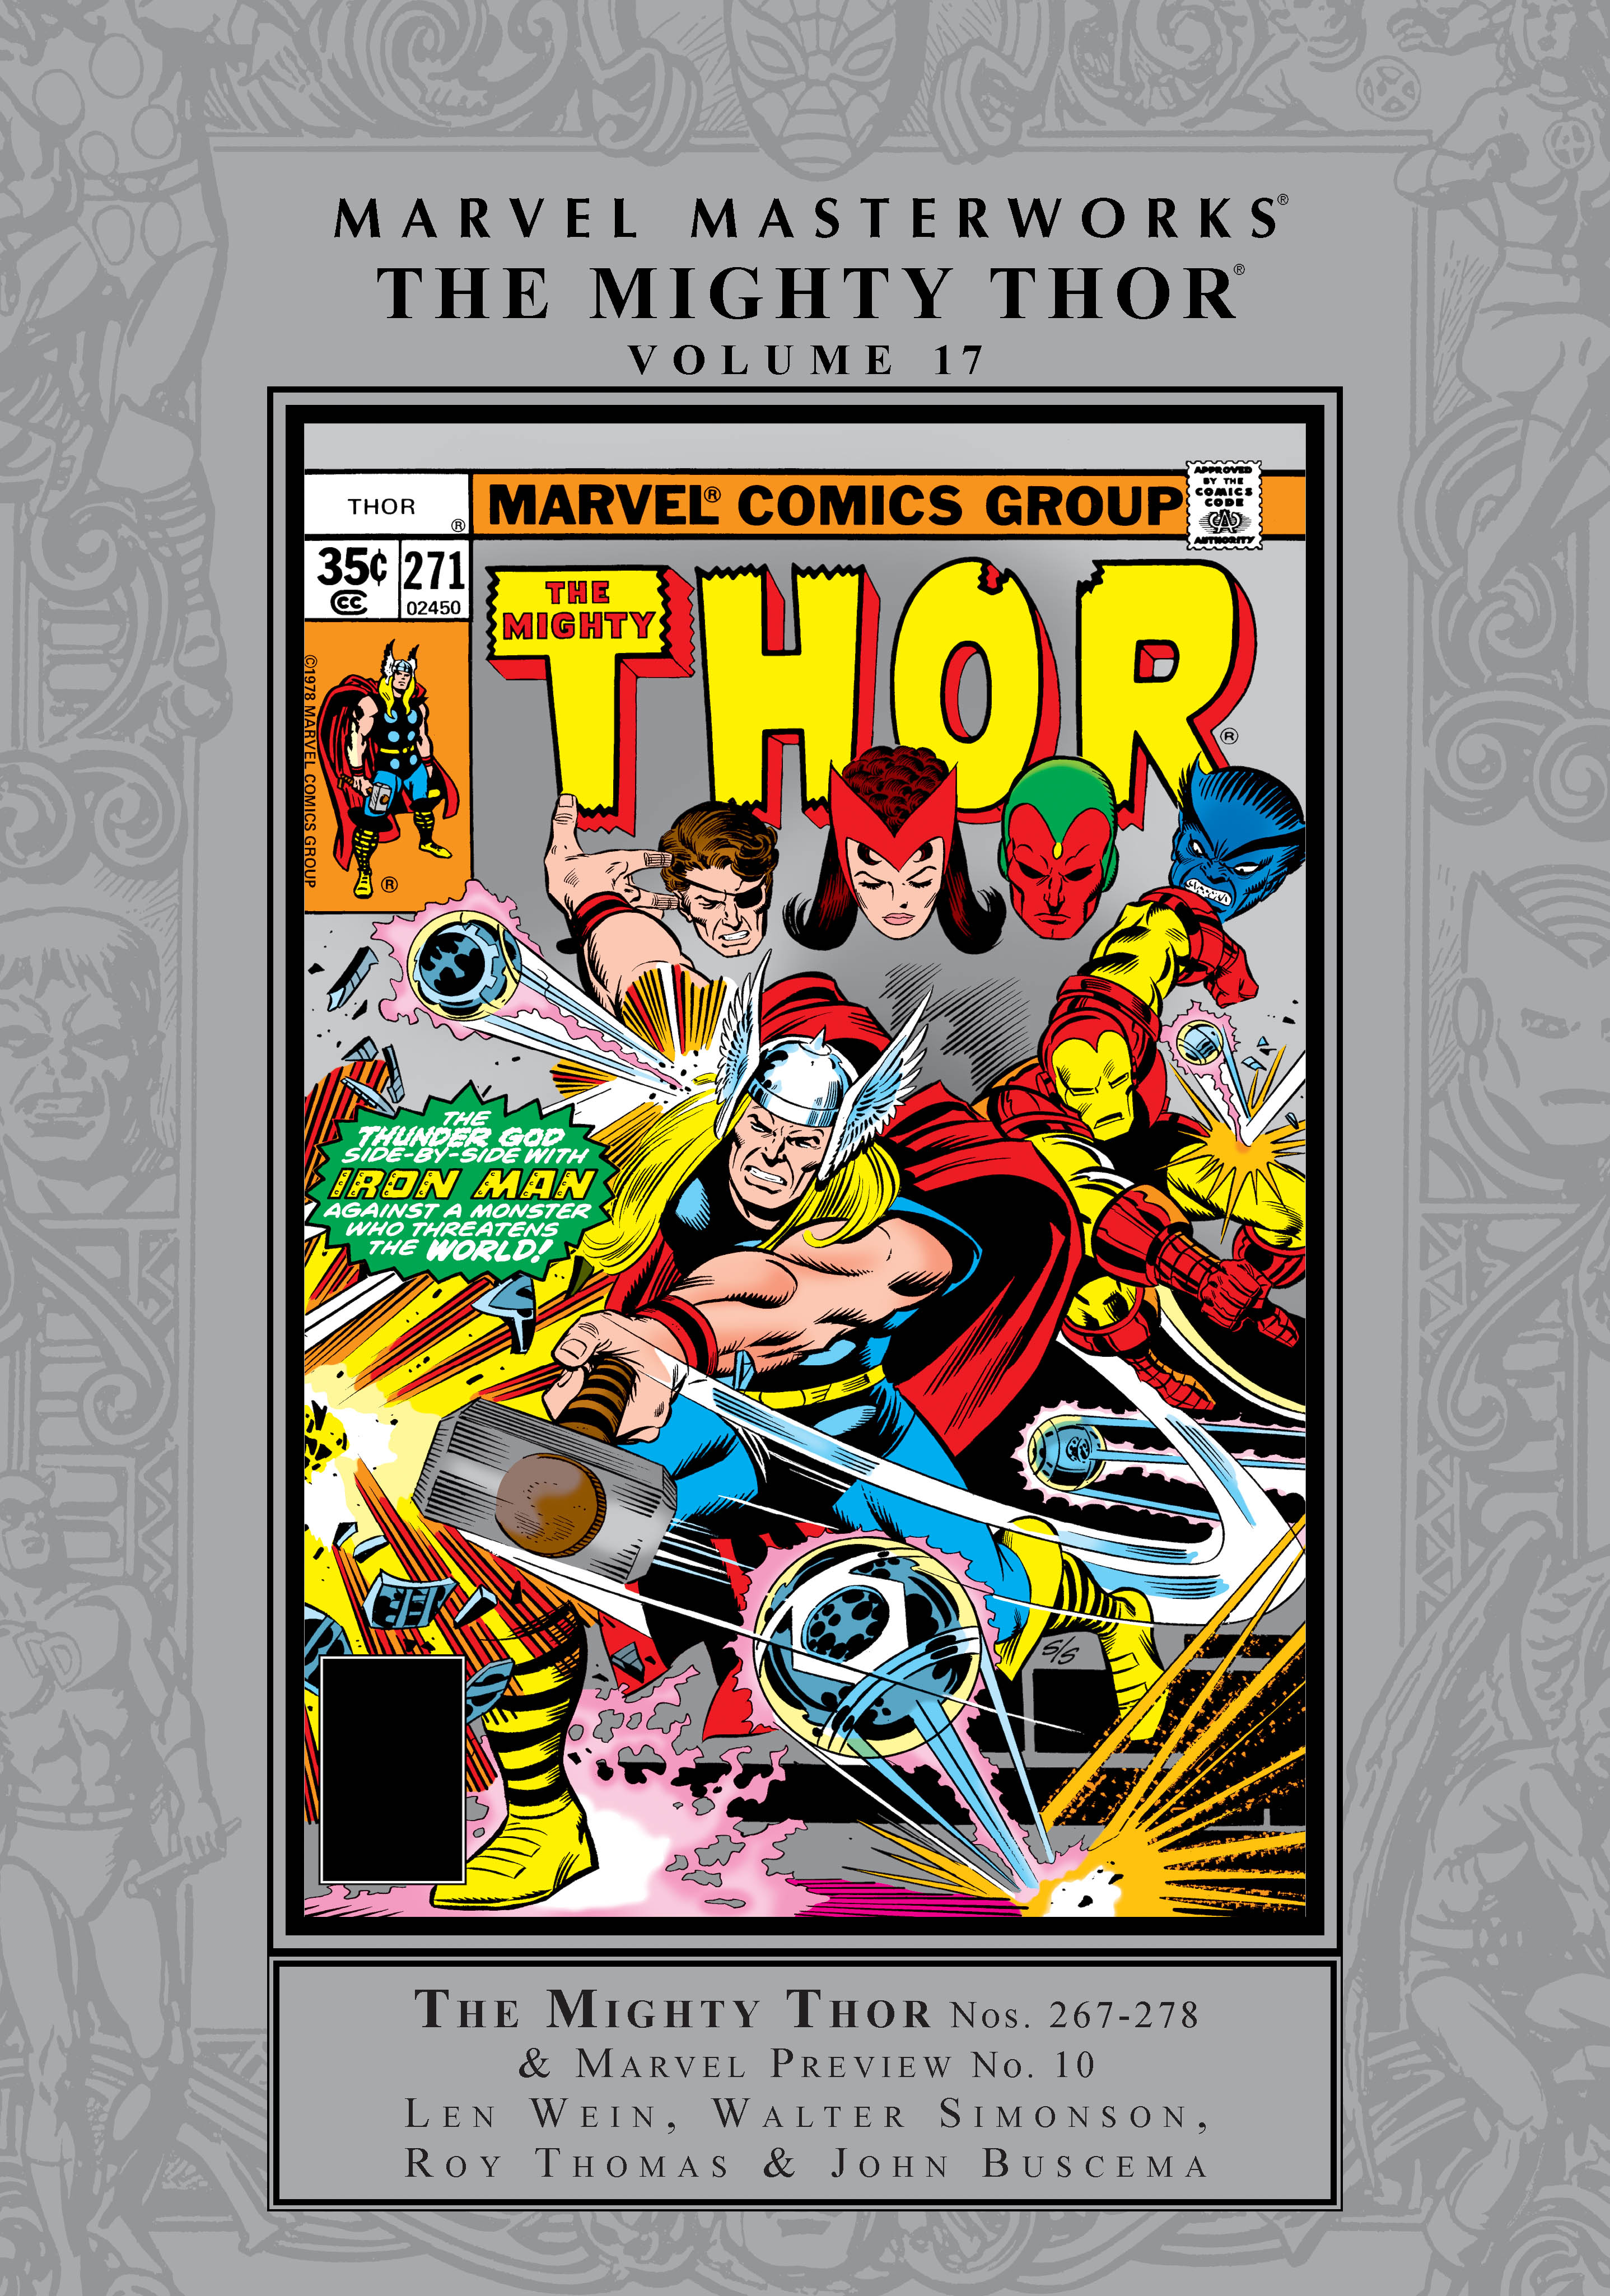 Marvel Masterworks: The Mighty Thor Vol. 17 (Hardcover)